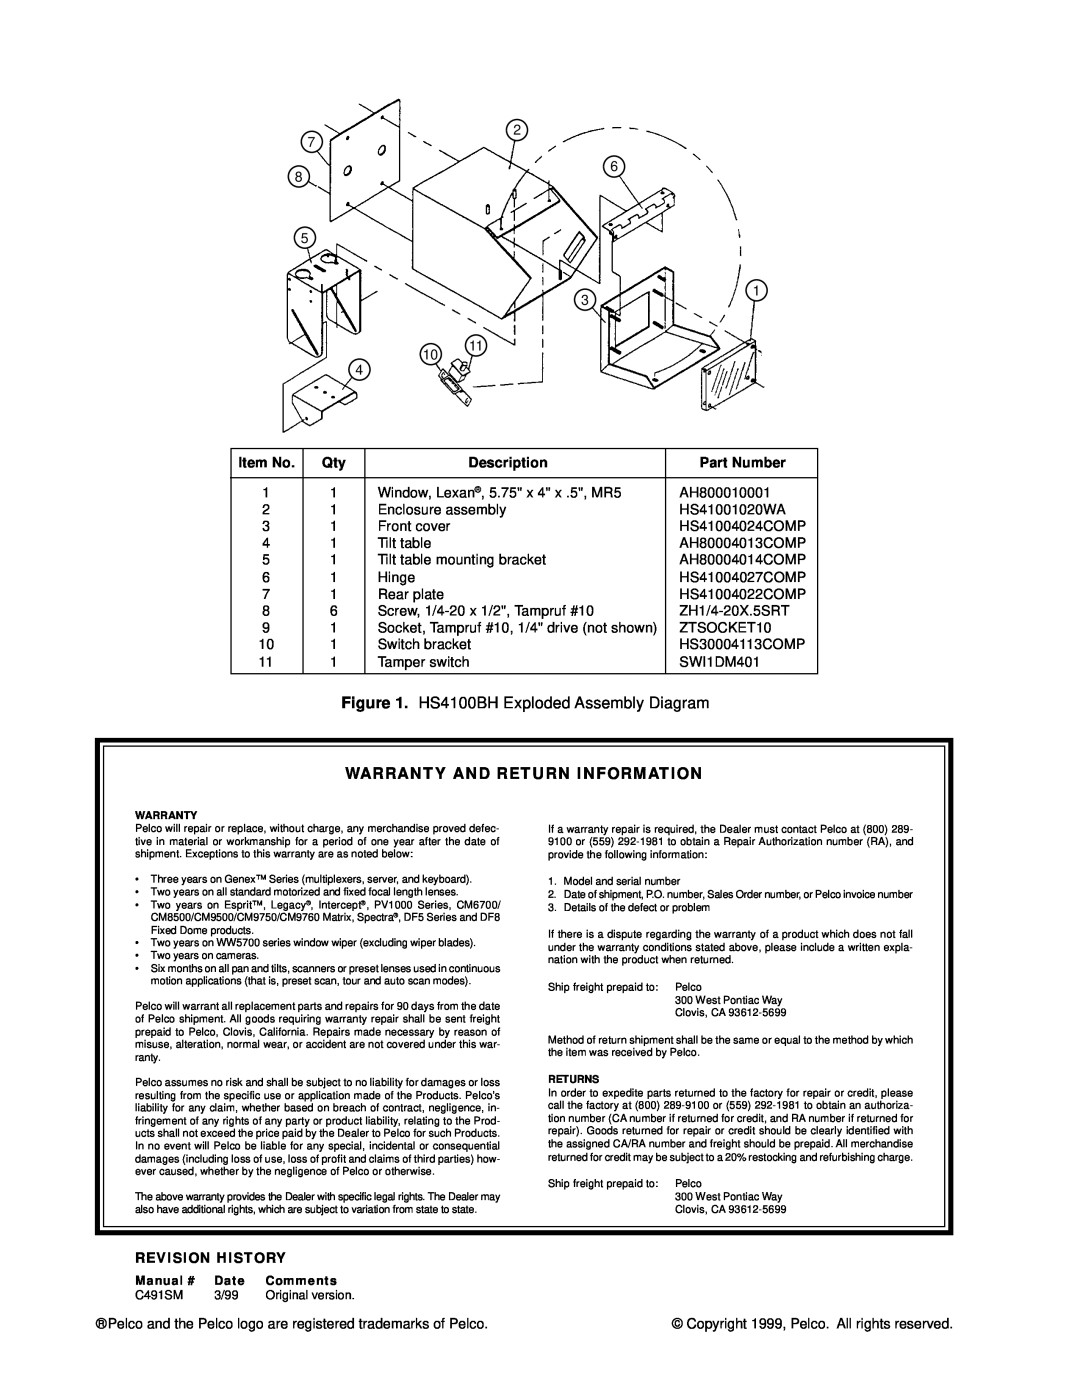 Pelco manual Warranty And Return Information, HS4100BH Exploded Assembly Diagram, Item No, Description, Part Number 